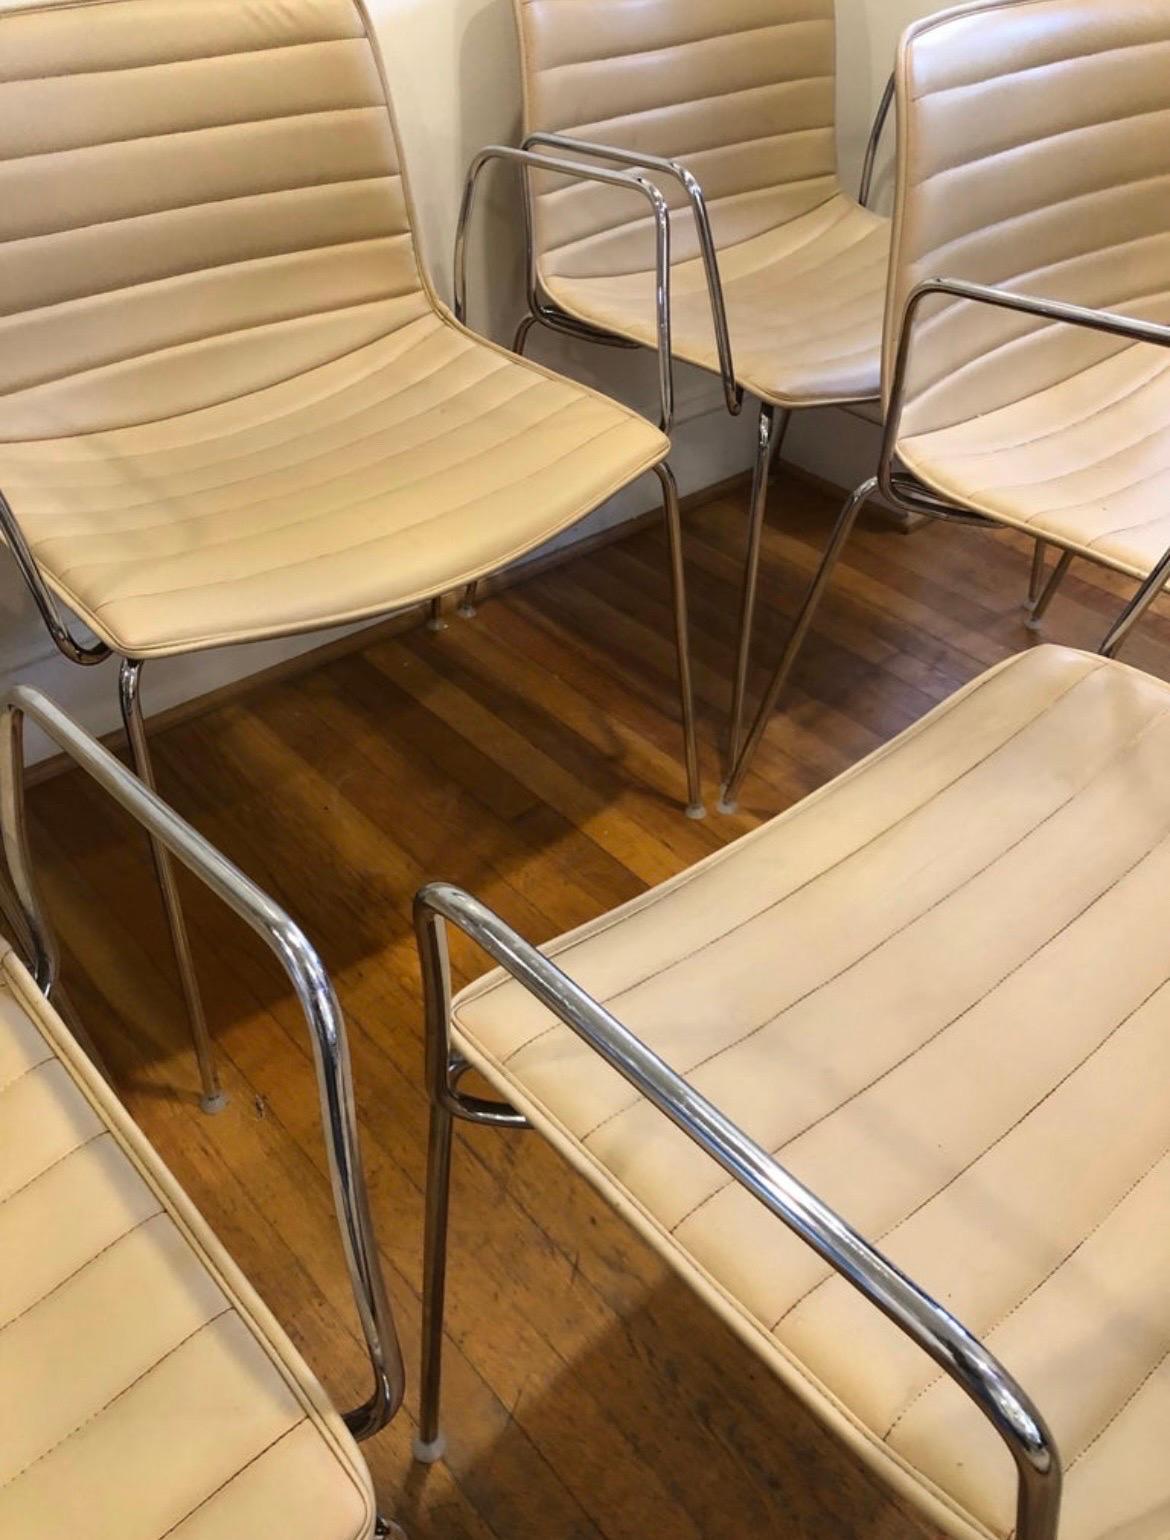 Arper Catifa 53 Chairs - Tan Leather with Steel Base and Arms - 10 Available For Sale 2